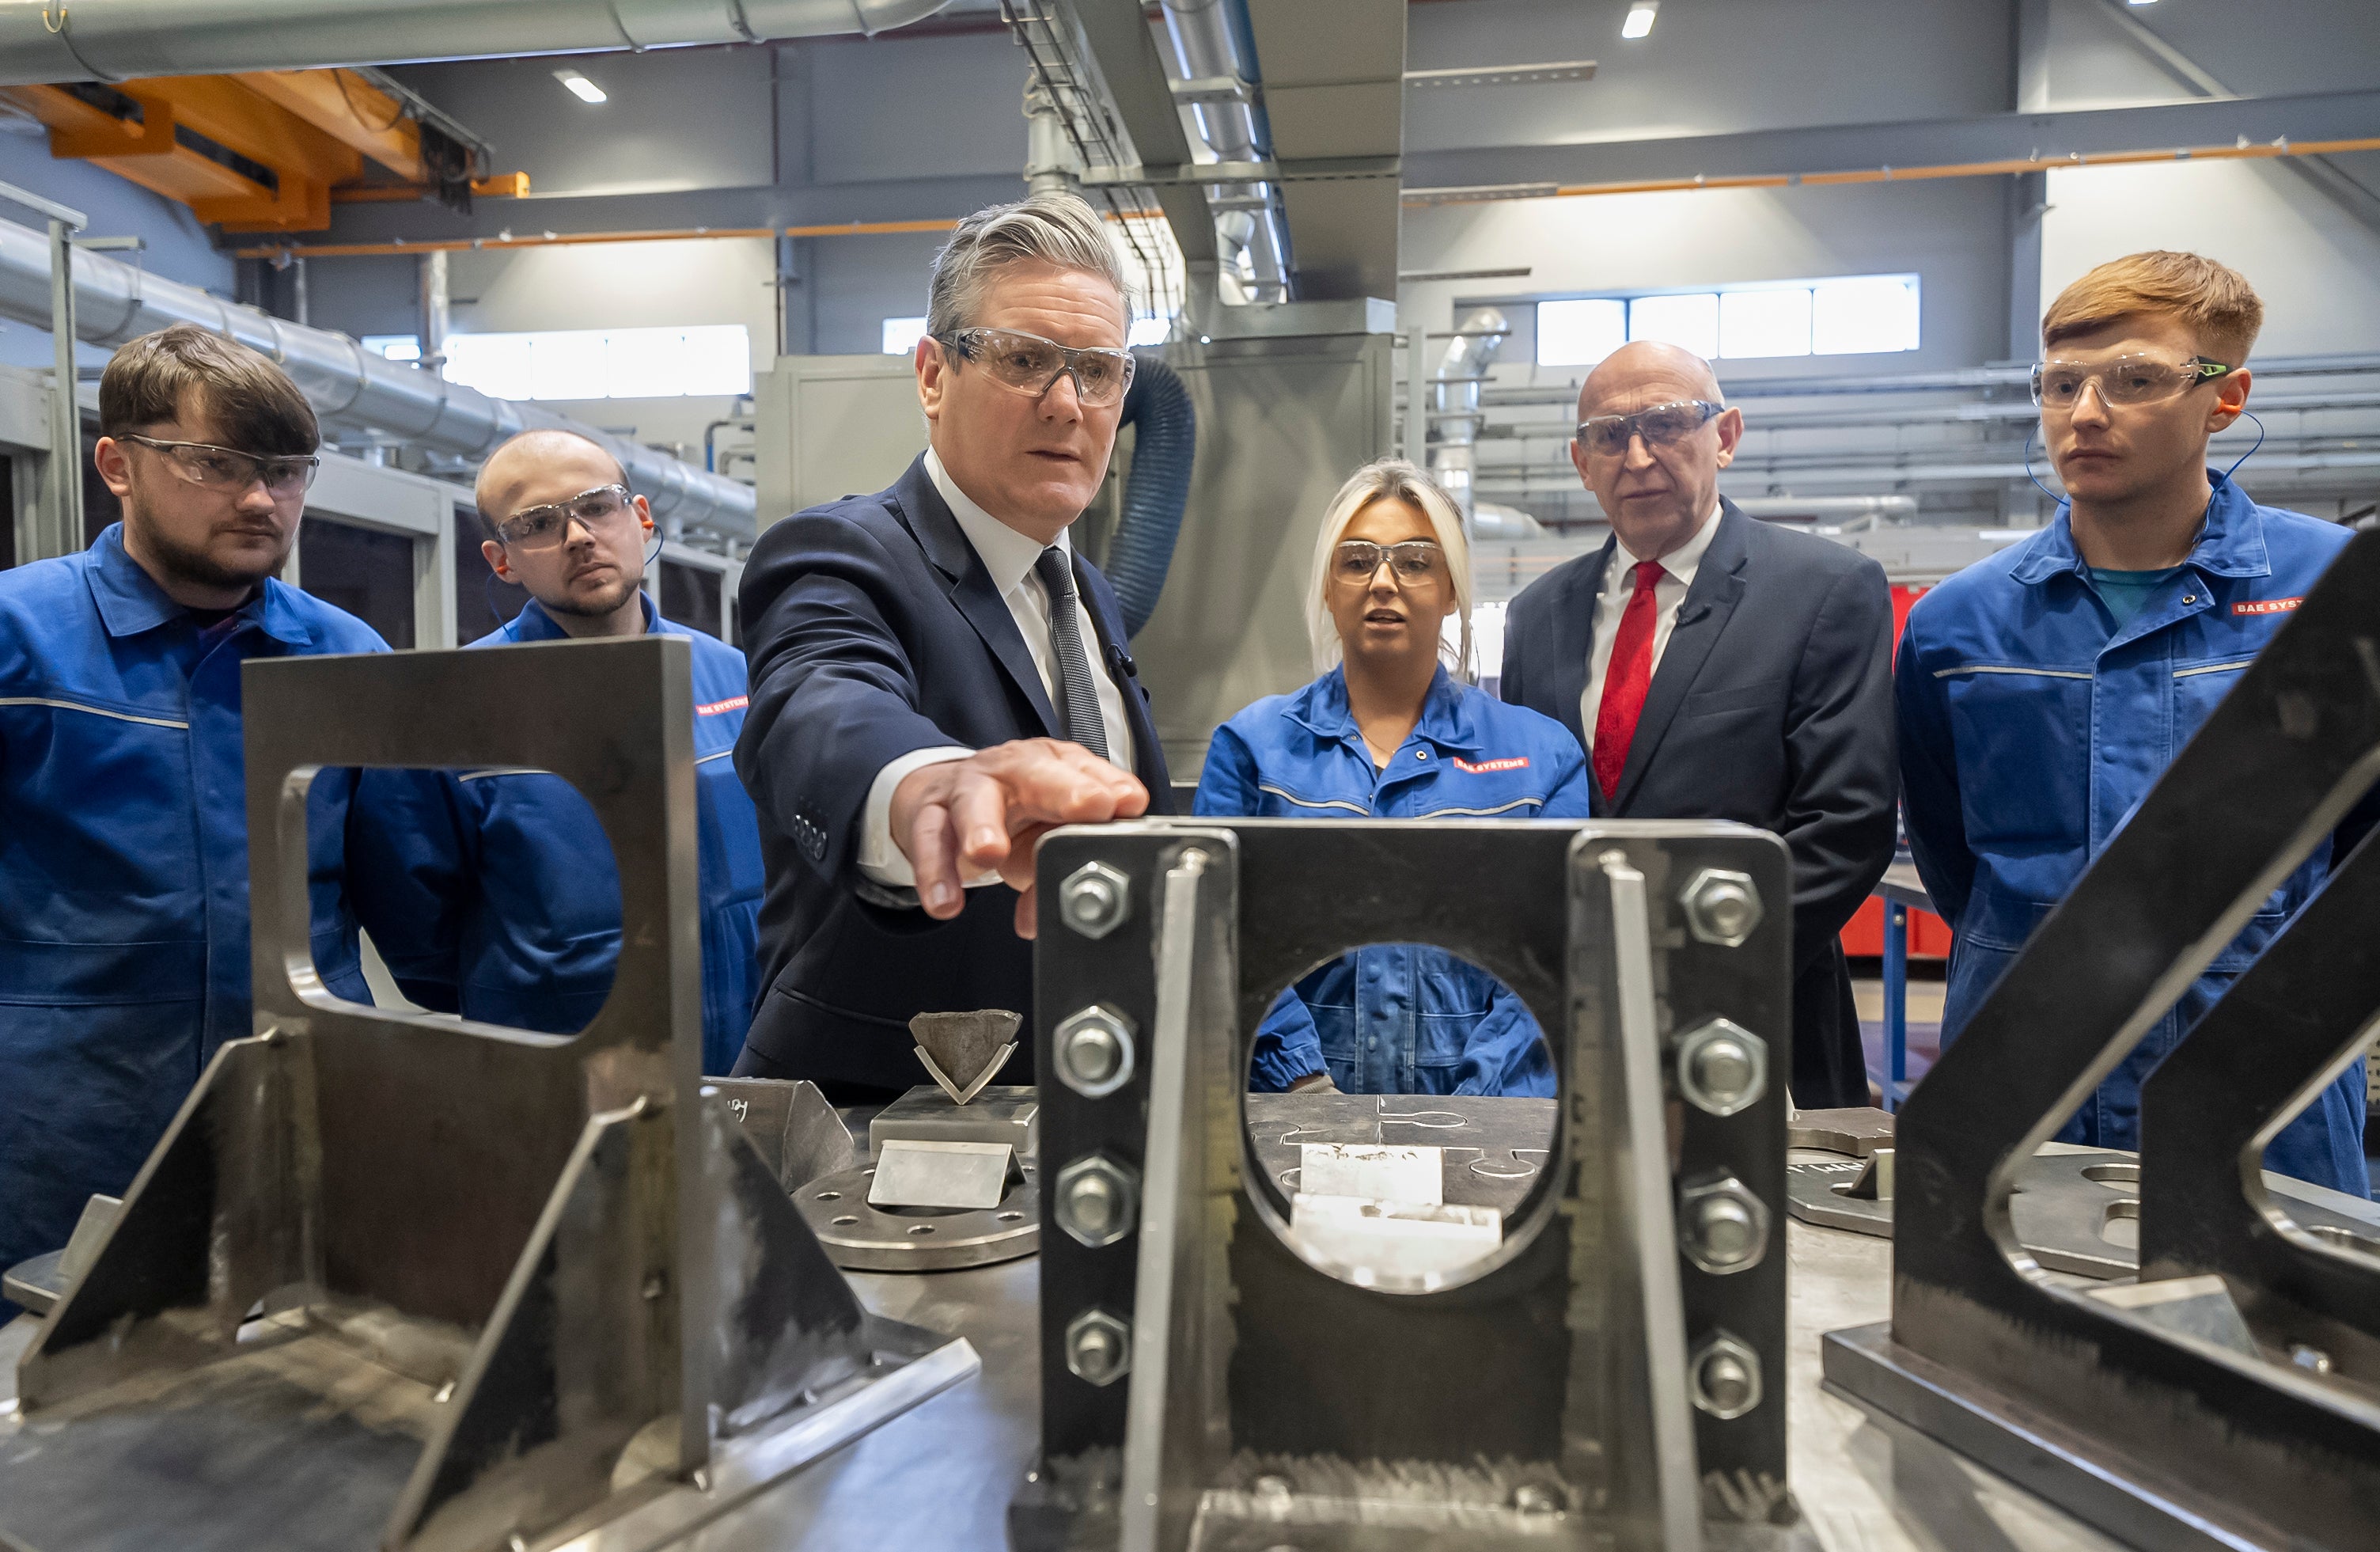 Labour leader Keir Starmer during a campaign visit to BAE Systems in Barrow-in-Furness, Cumbria